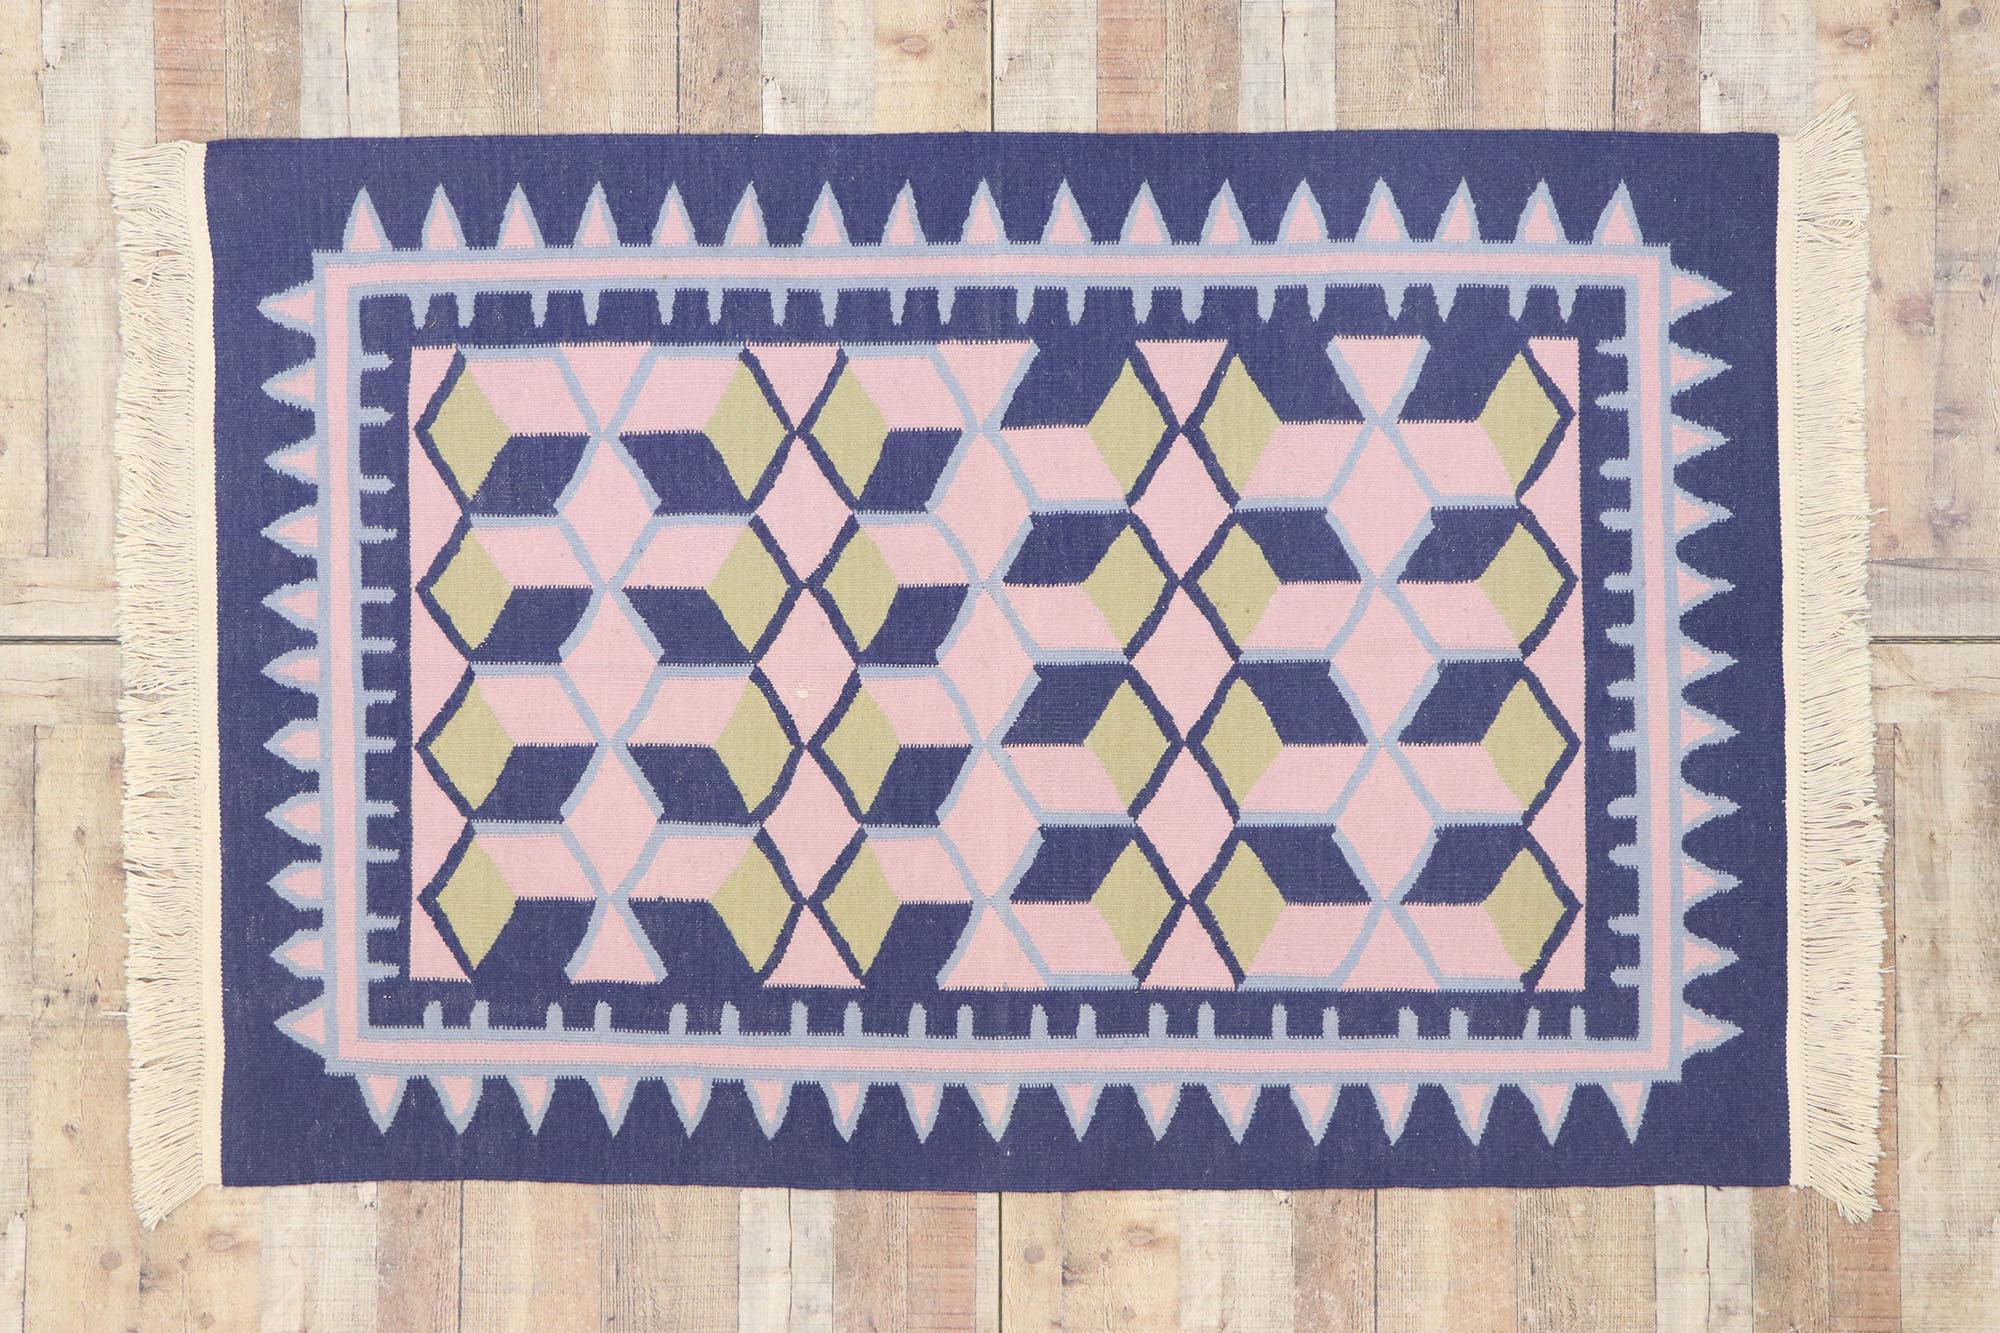 Vintage Chinese Geometric Kilim Rug with Post-Modern Cubist Style 1